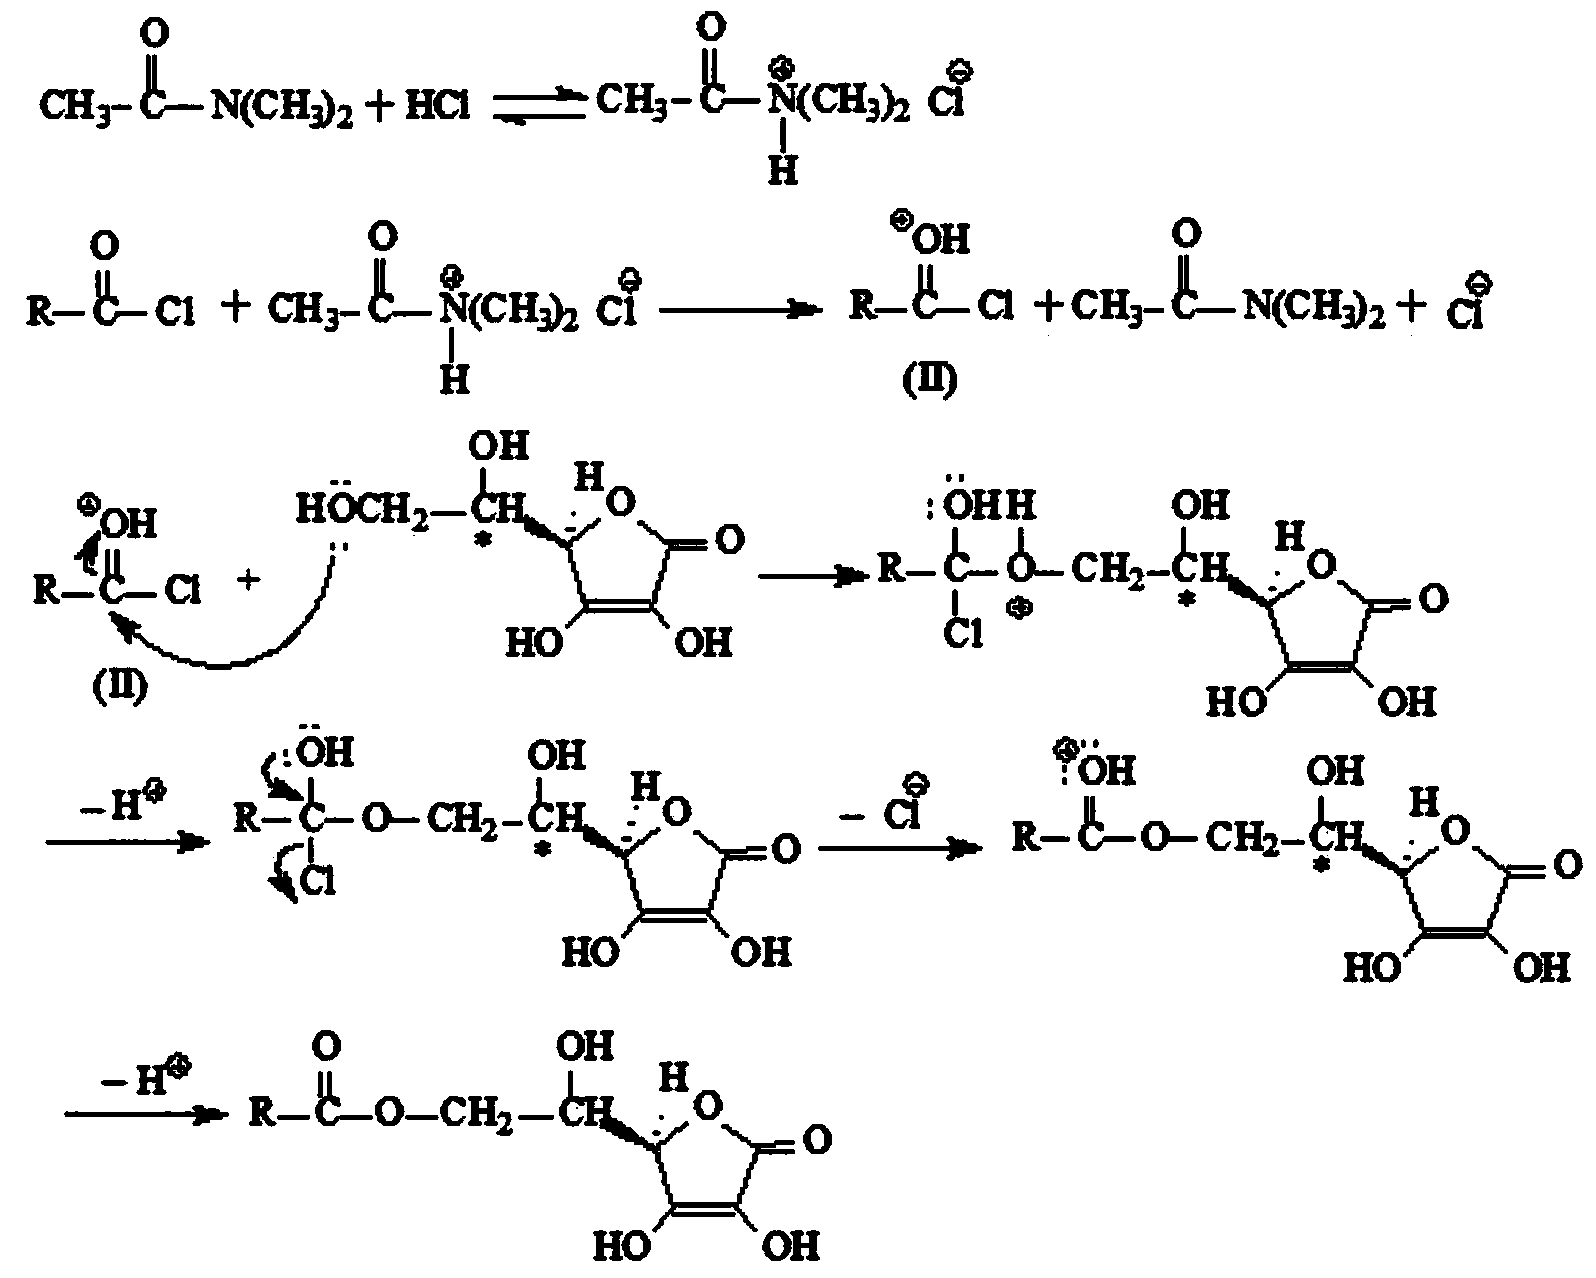 Method for preparing L-ascorbic acid or D-erythorbic acid carboxylate by using acyl chloride